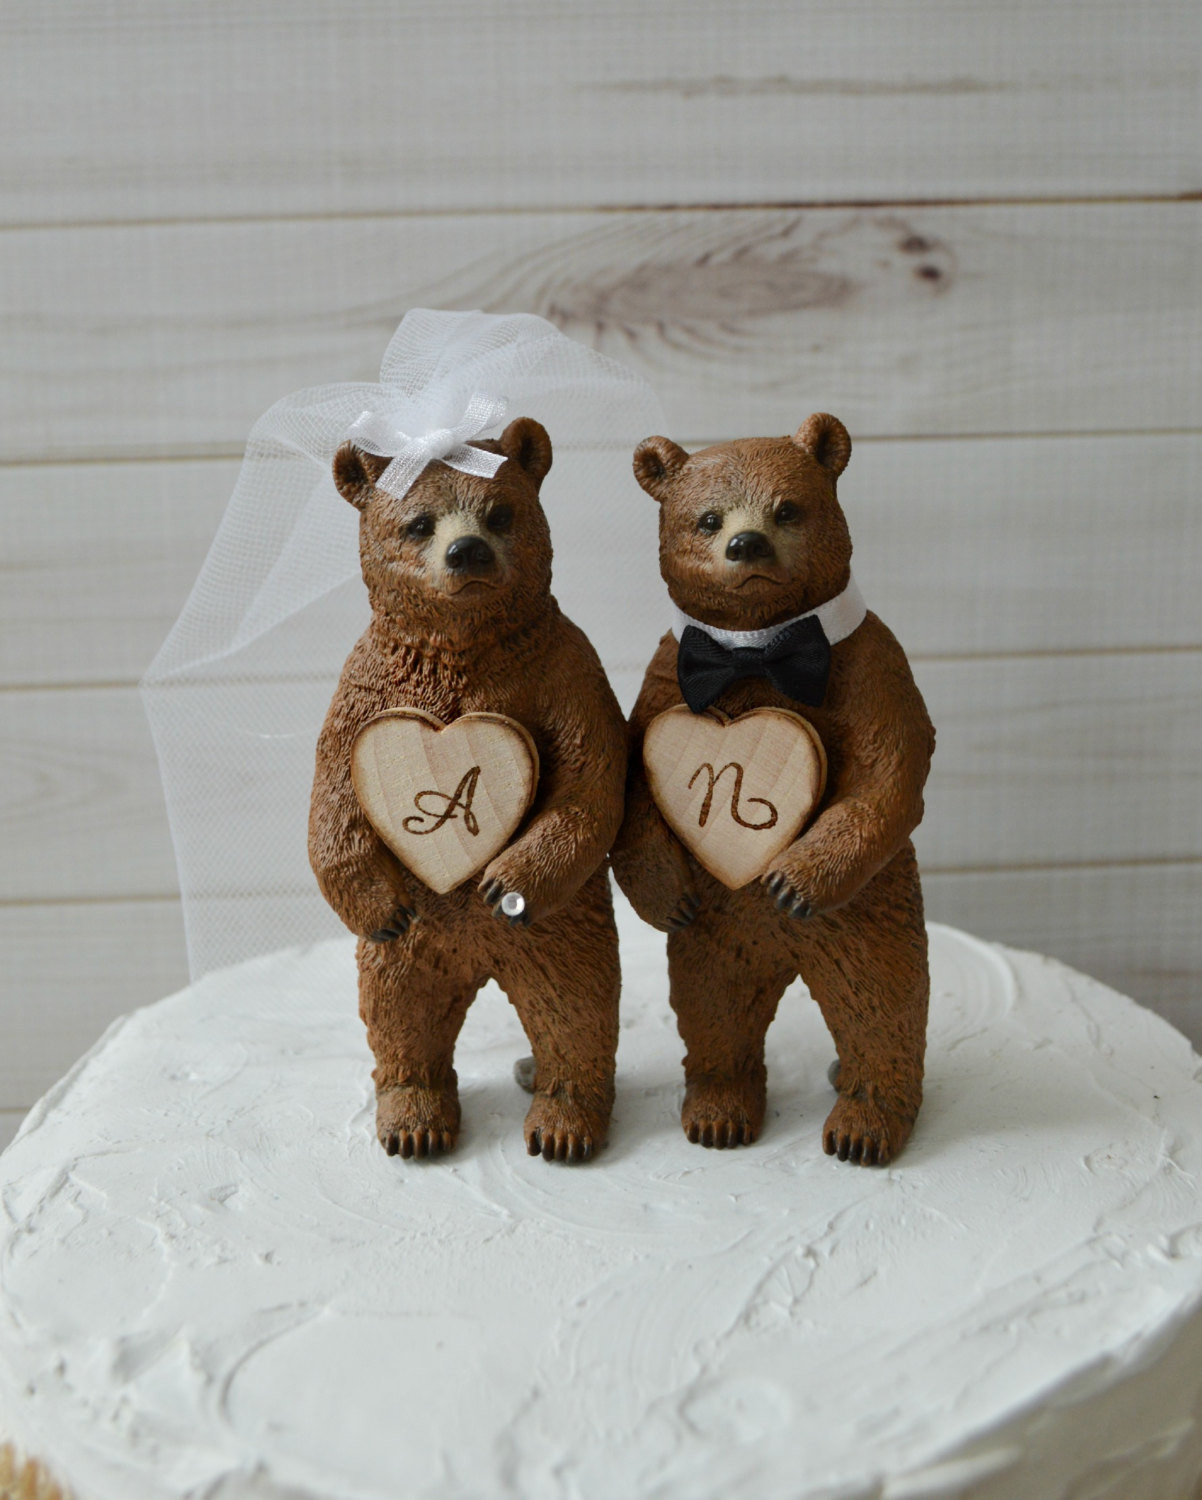 Bear Wedding Cake Topper
 country bear wedding cake topper rustic brown by